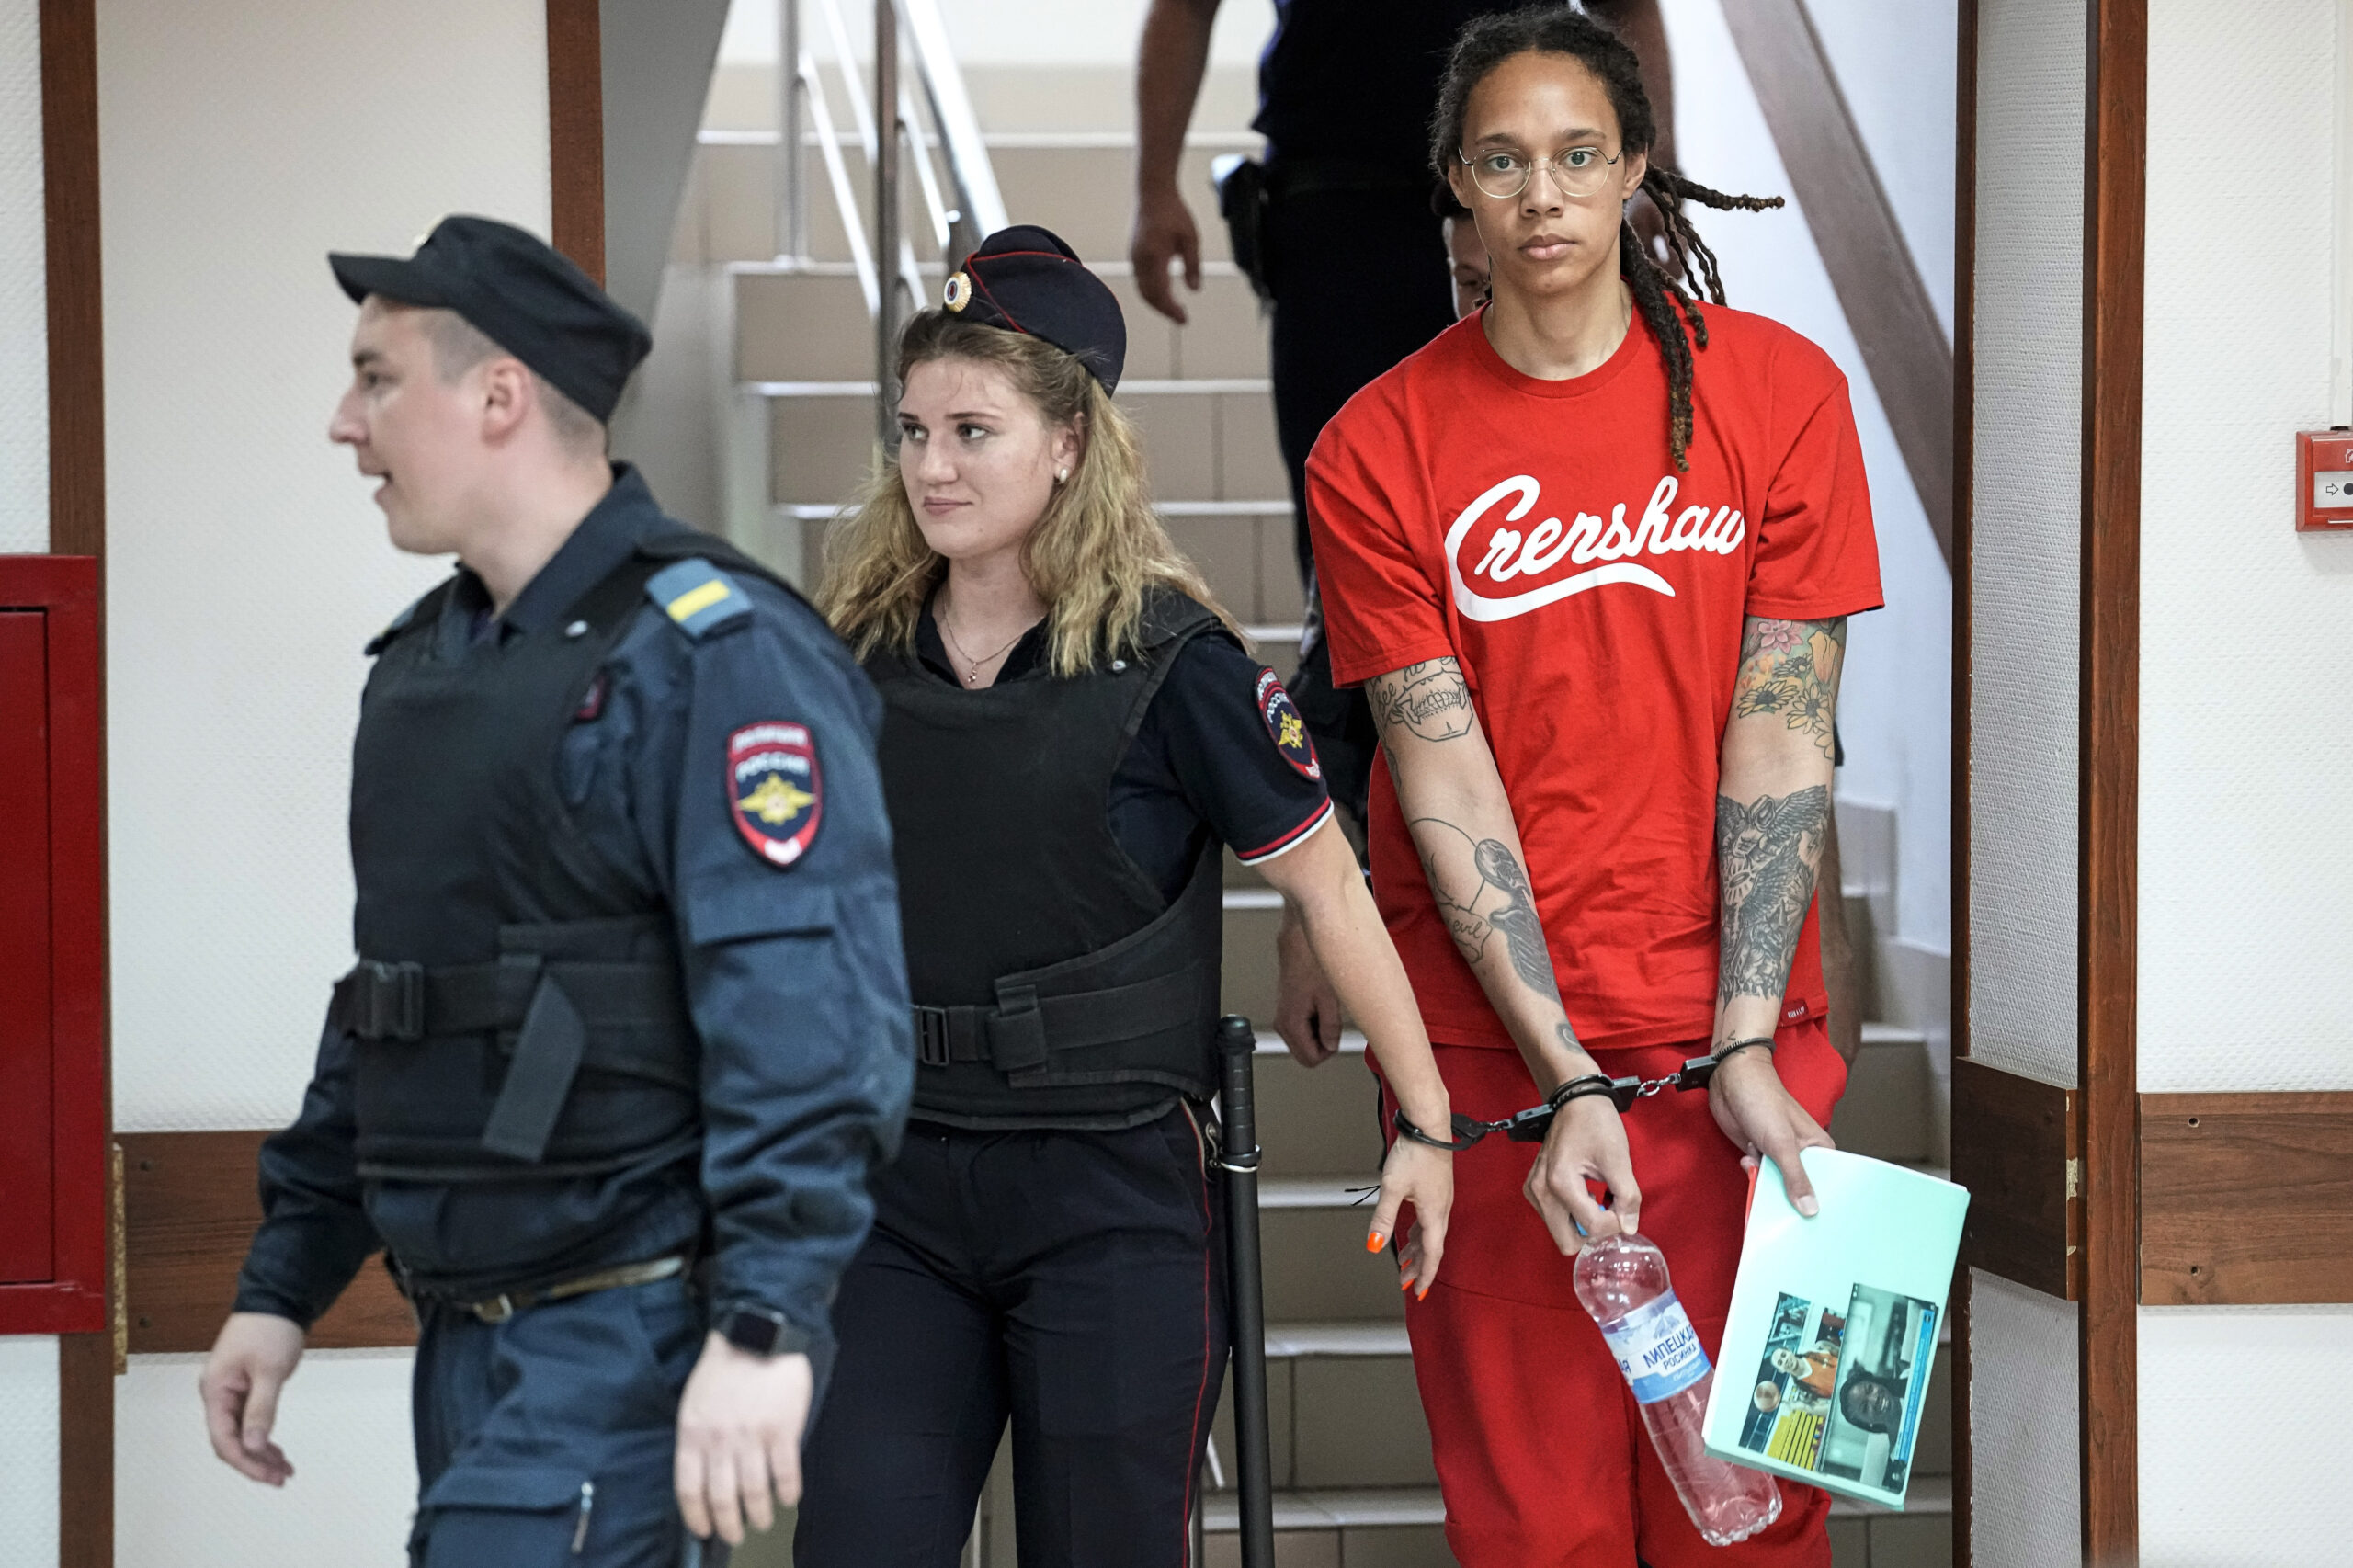 WNBA star and two-time Olympic gold medalist Brittney Griner is escorted to a courtroom for a hearing, in Khimki just outside Moscow, Russia, Thursday, July 7, 2022. Jailed American basketball star Brittney Griner returns to a Russian court on Thursday amid a growing chorus of calls for Washington to do more to secure her release nearly five months after being arrested on drug charges. (AP Photo/Alexander Zemlianichenko)